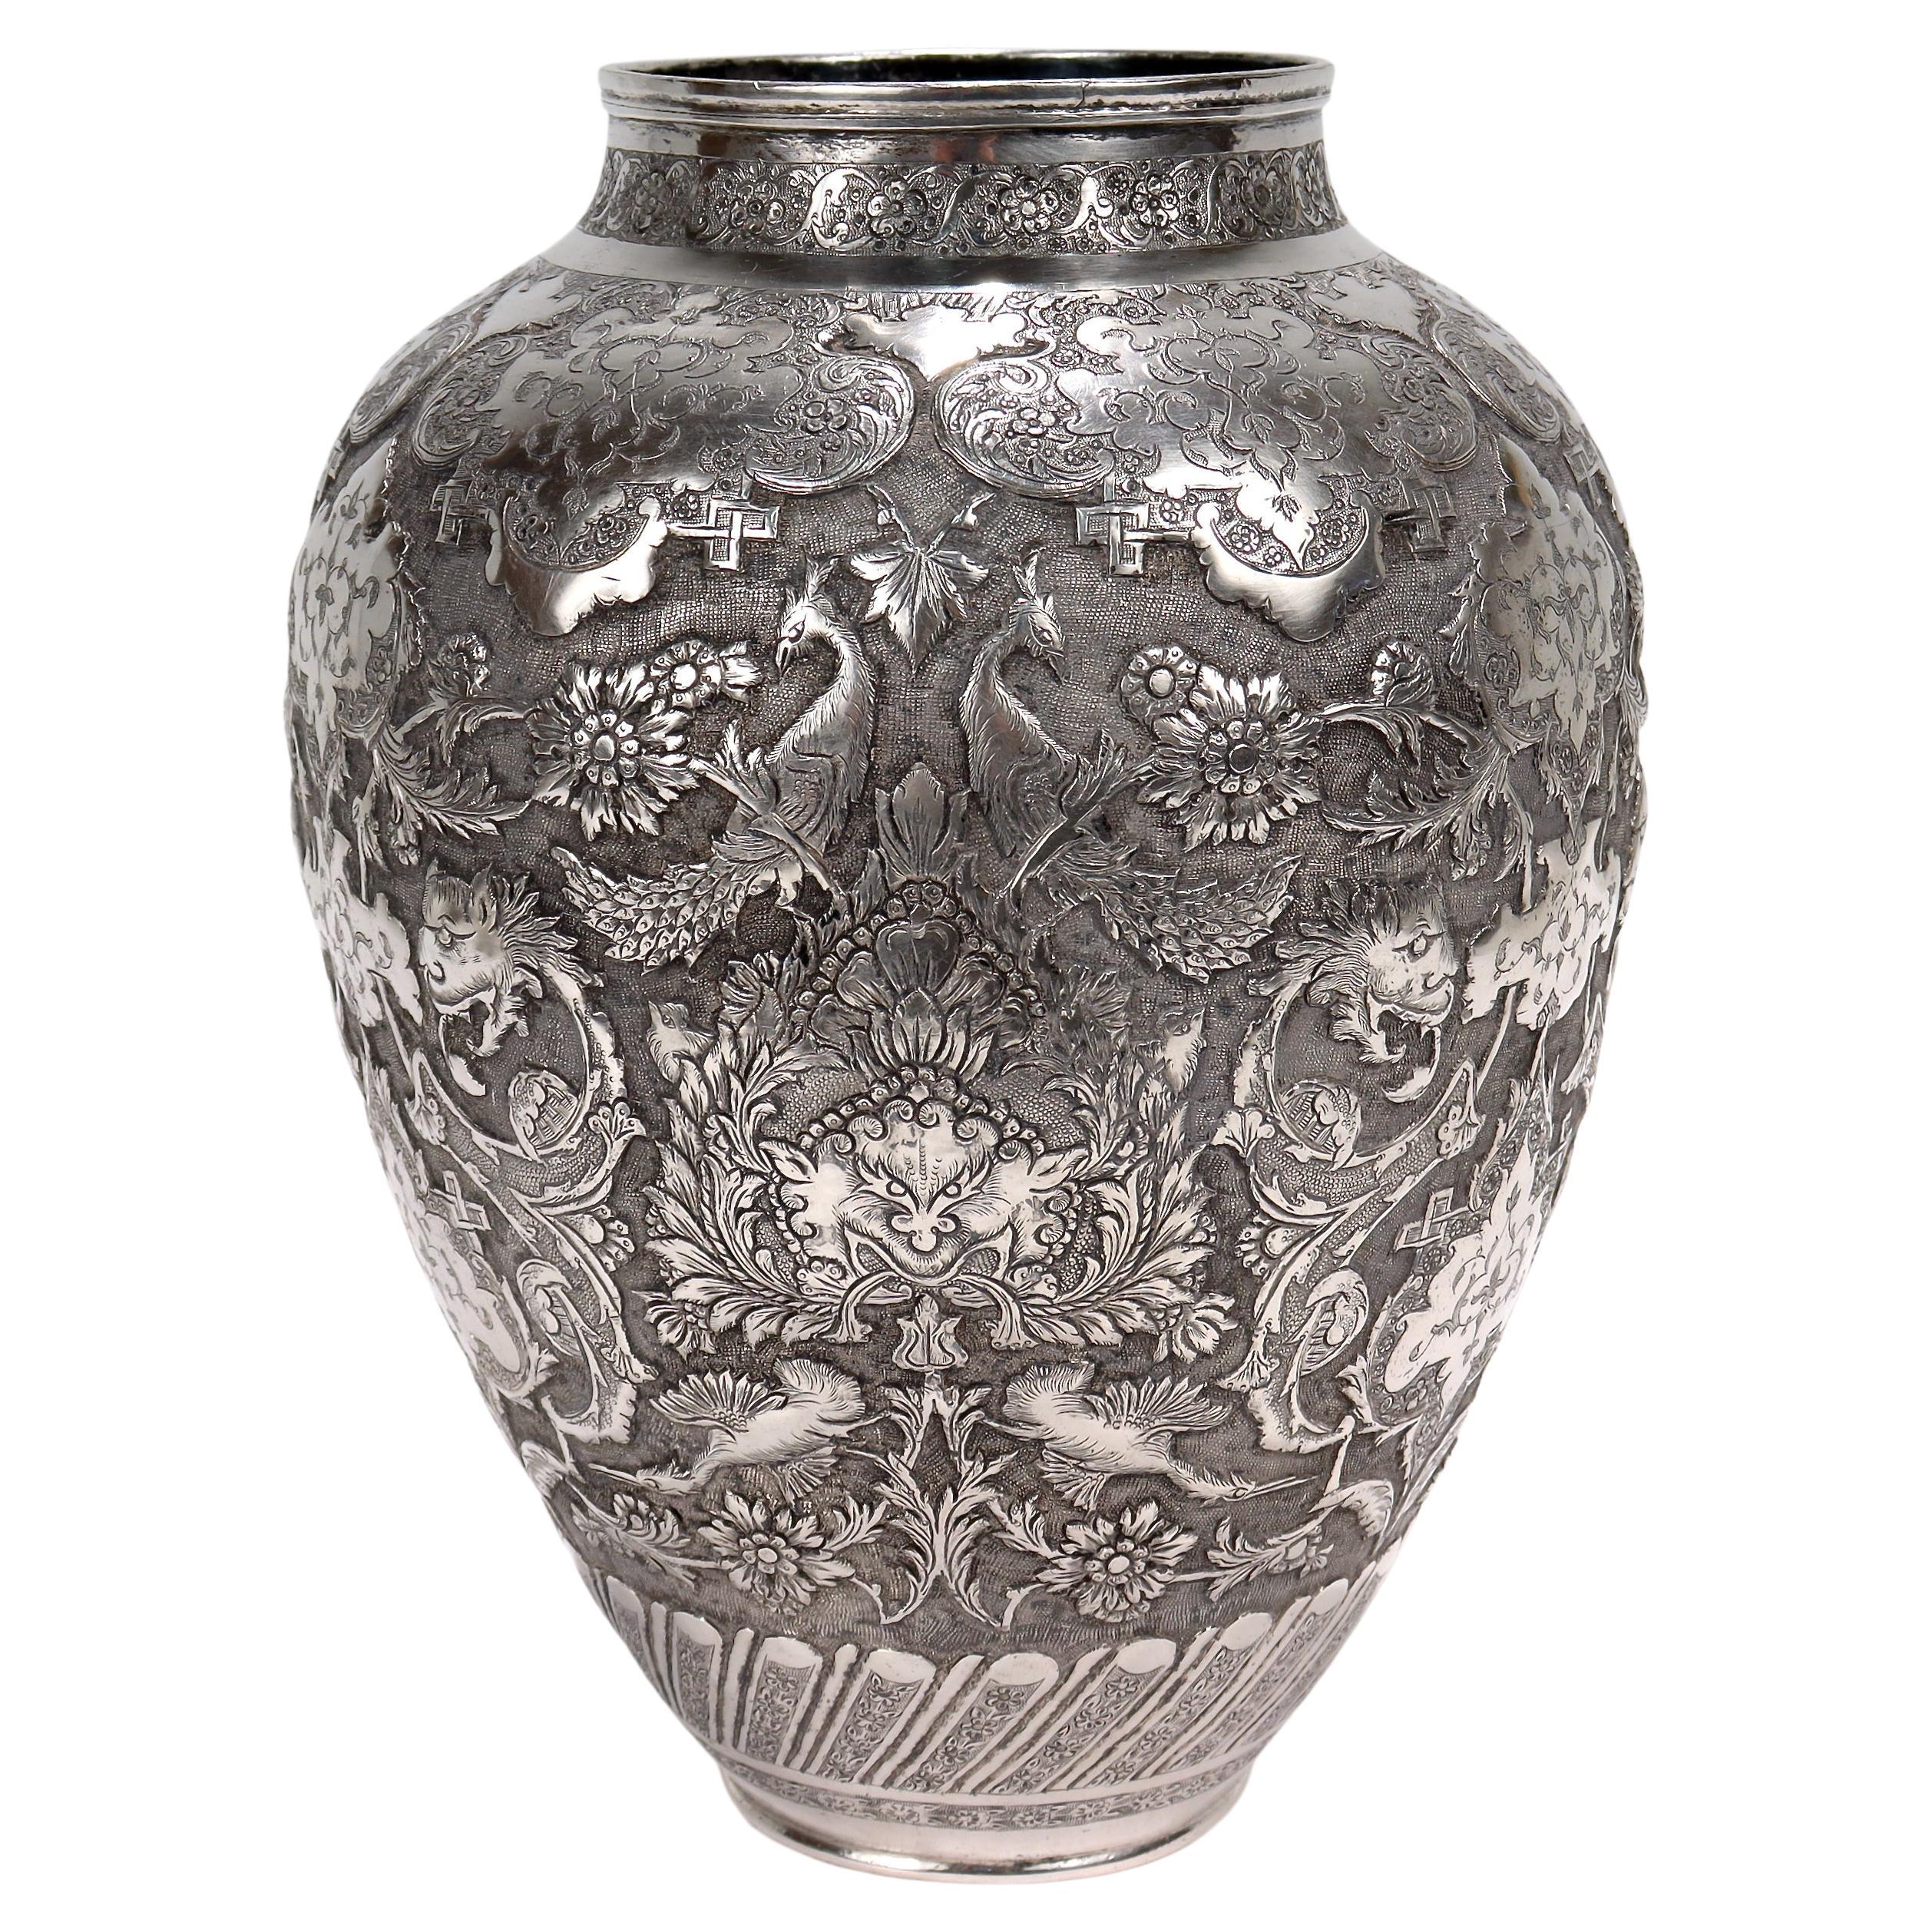 Old or Antique Signed Islamic Ottoman or Persian Repousse Silver Vase For Sale